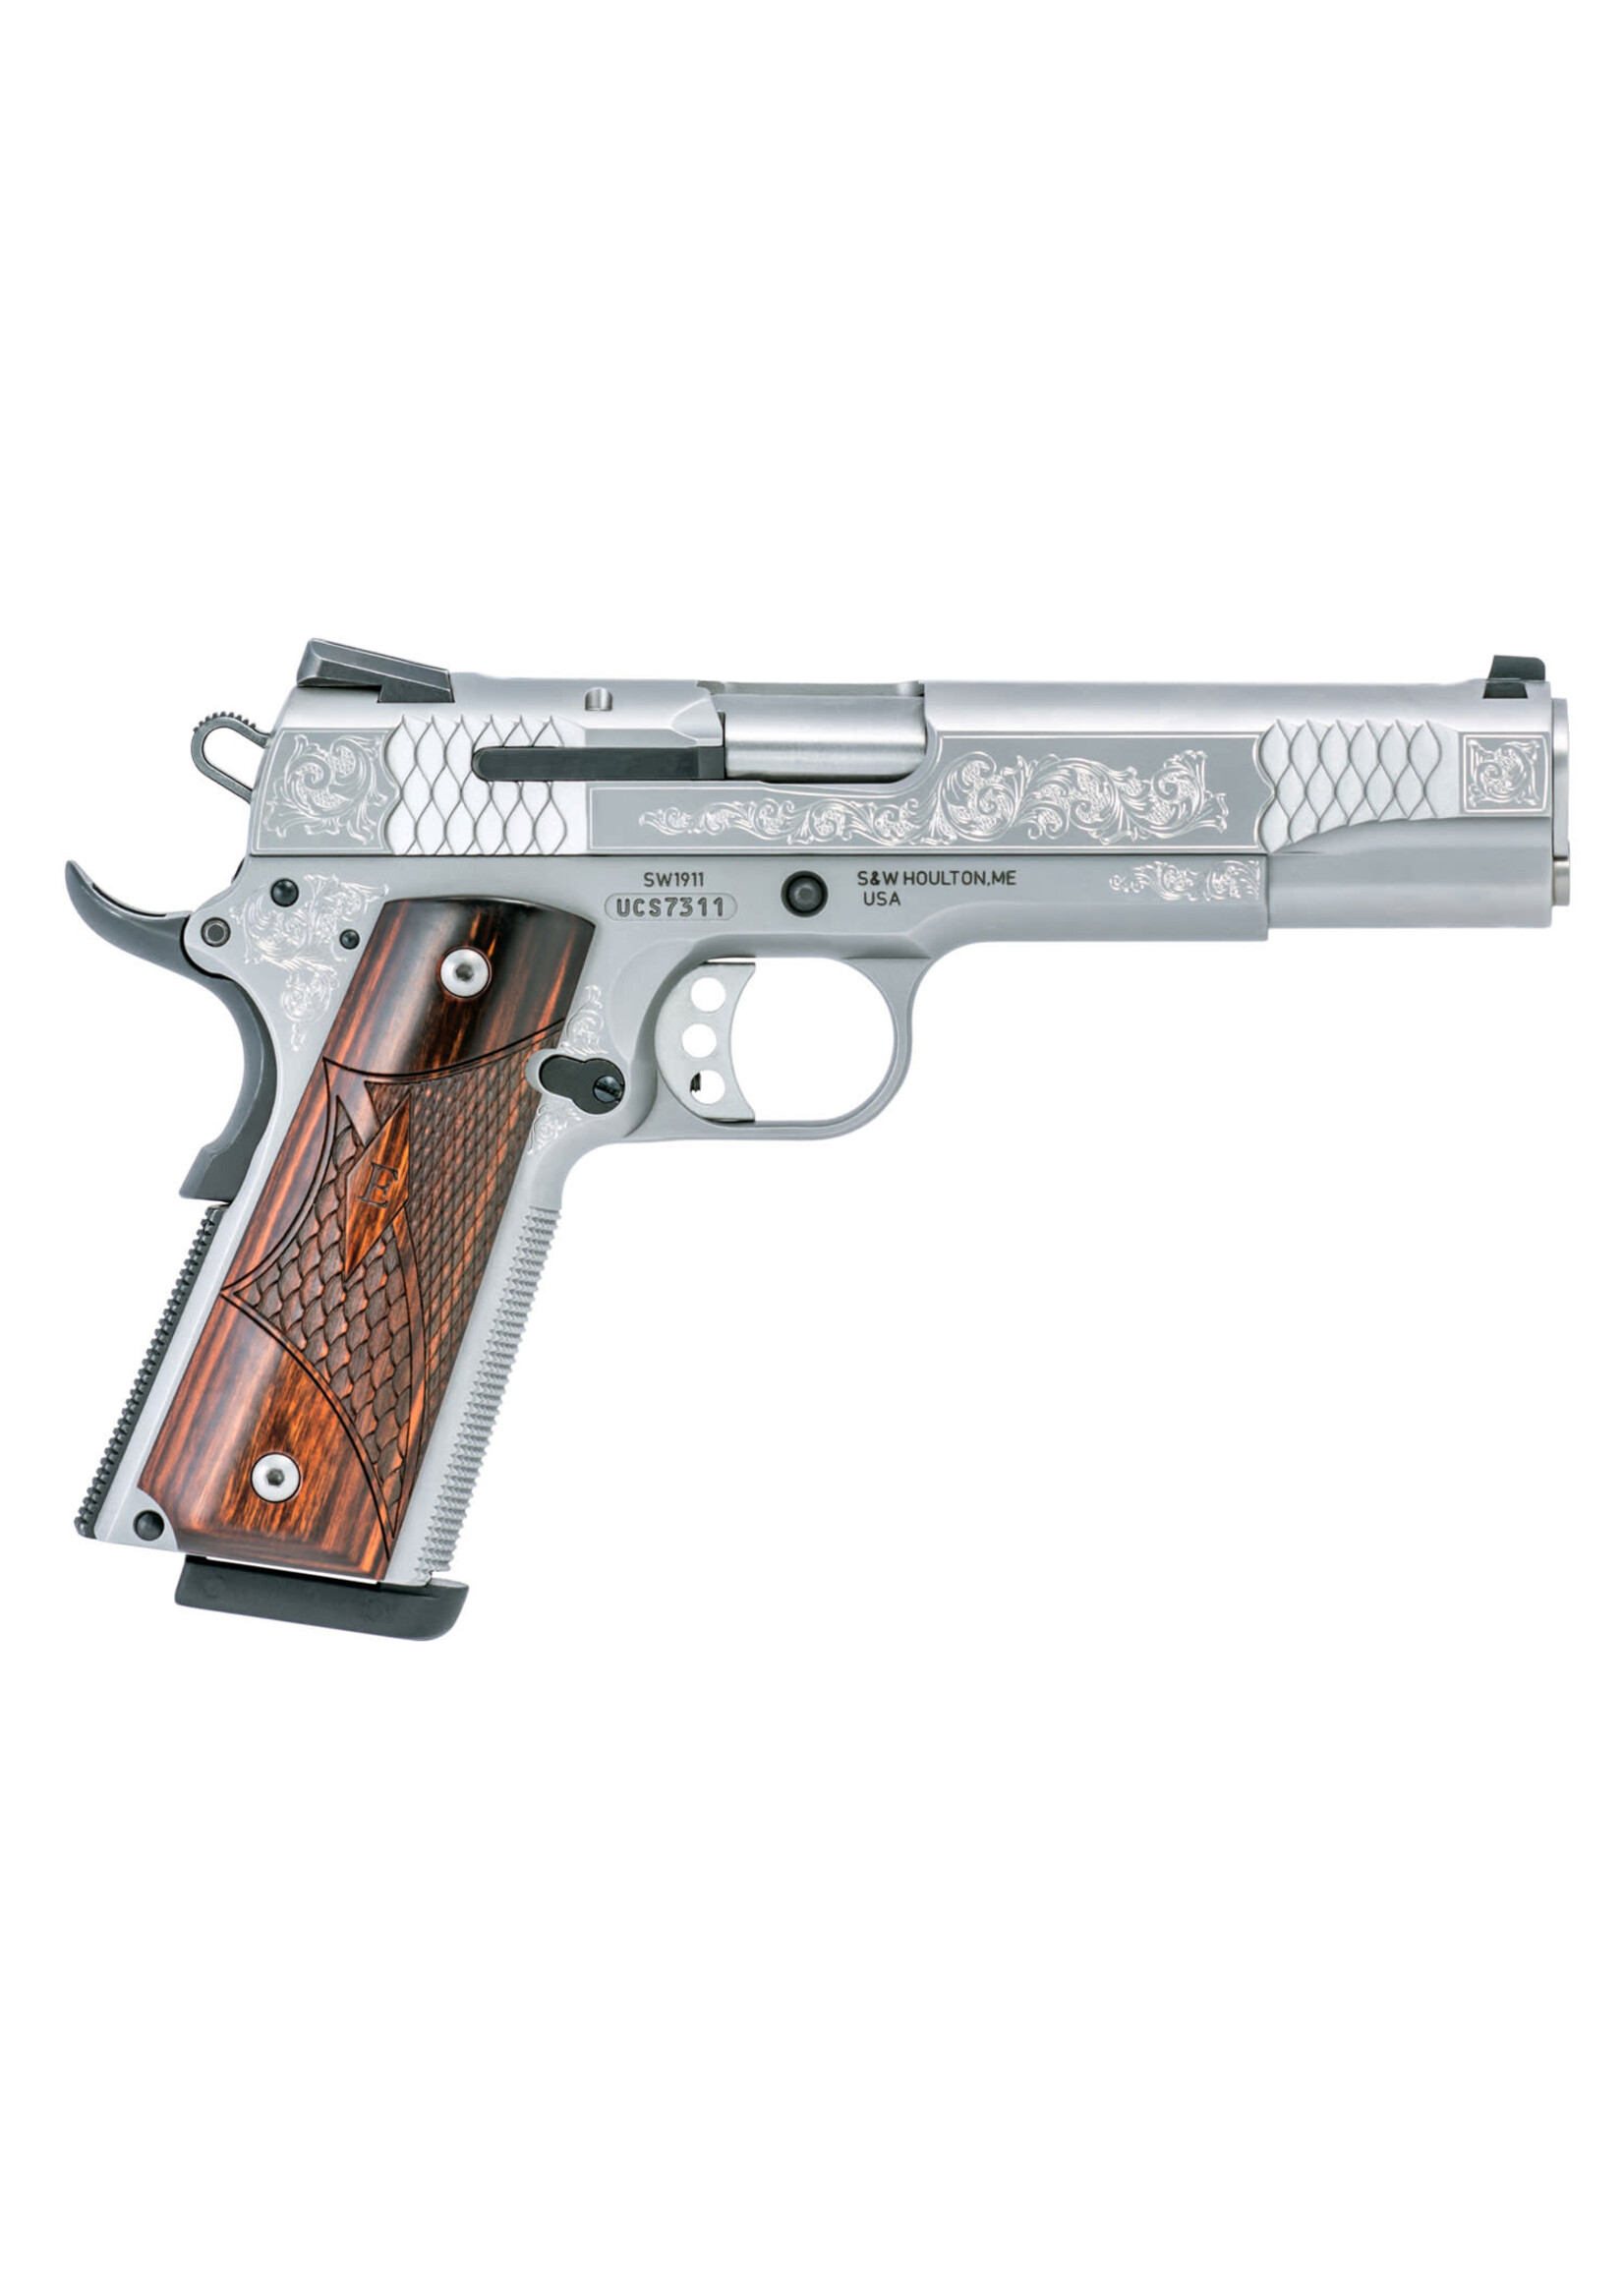 Smith and Wesson (S&W) Smith & Wesson 10270 1911 E-Series 45 ACP 5" Barrel 8+1, Matte Stainless Steel Engraved Frame & Slide, Laminate Wood E Series Grip, Manual Safety Grip & Thumb